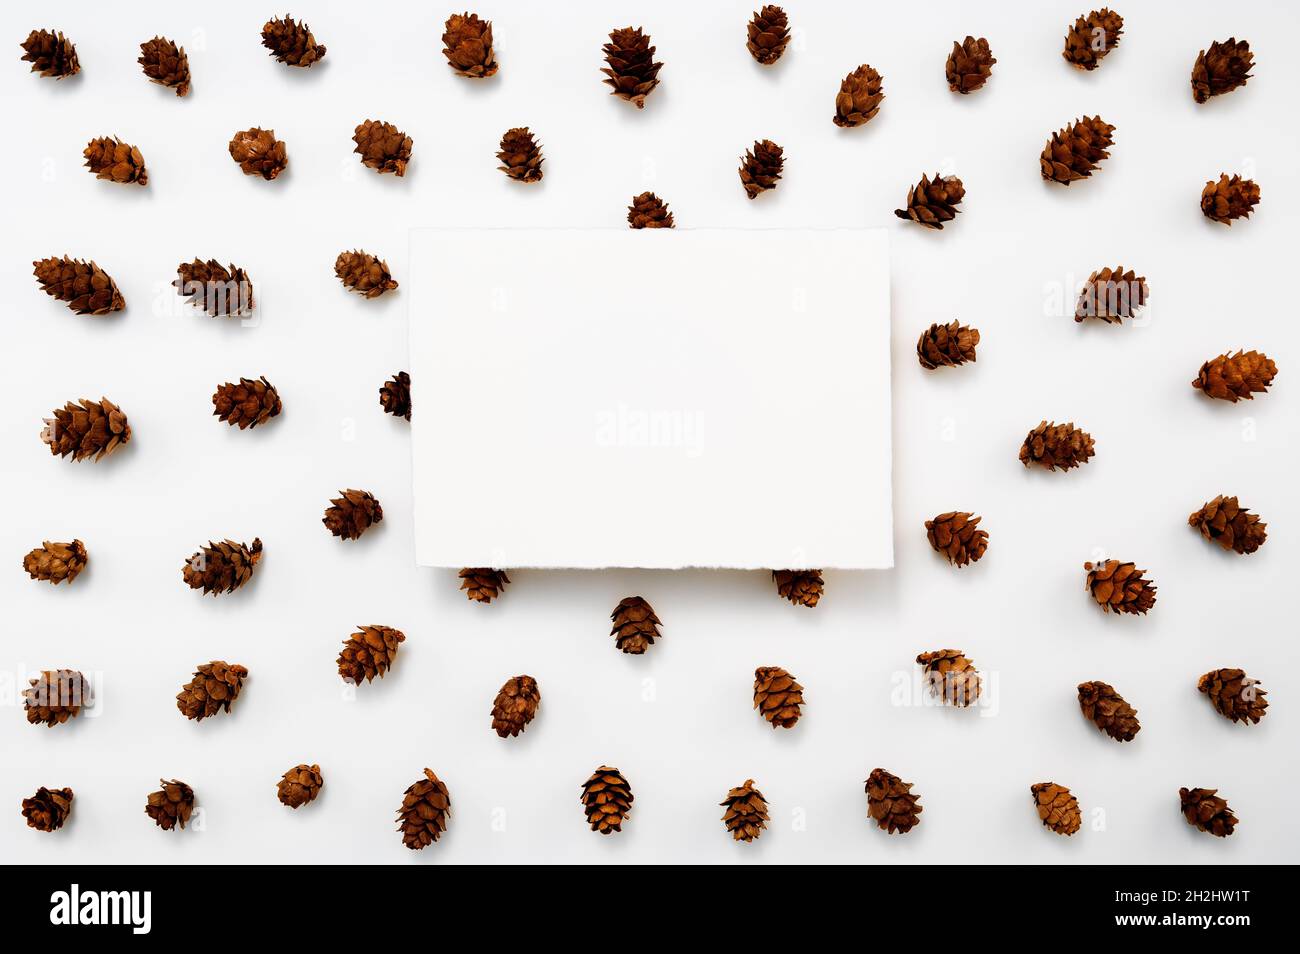 Autumn, winter or Christmas greeting card mockup. White, blank, handmade sheet of paper on a background of pine cones. Stock Photo